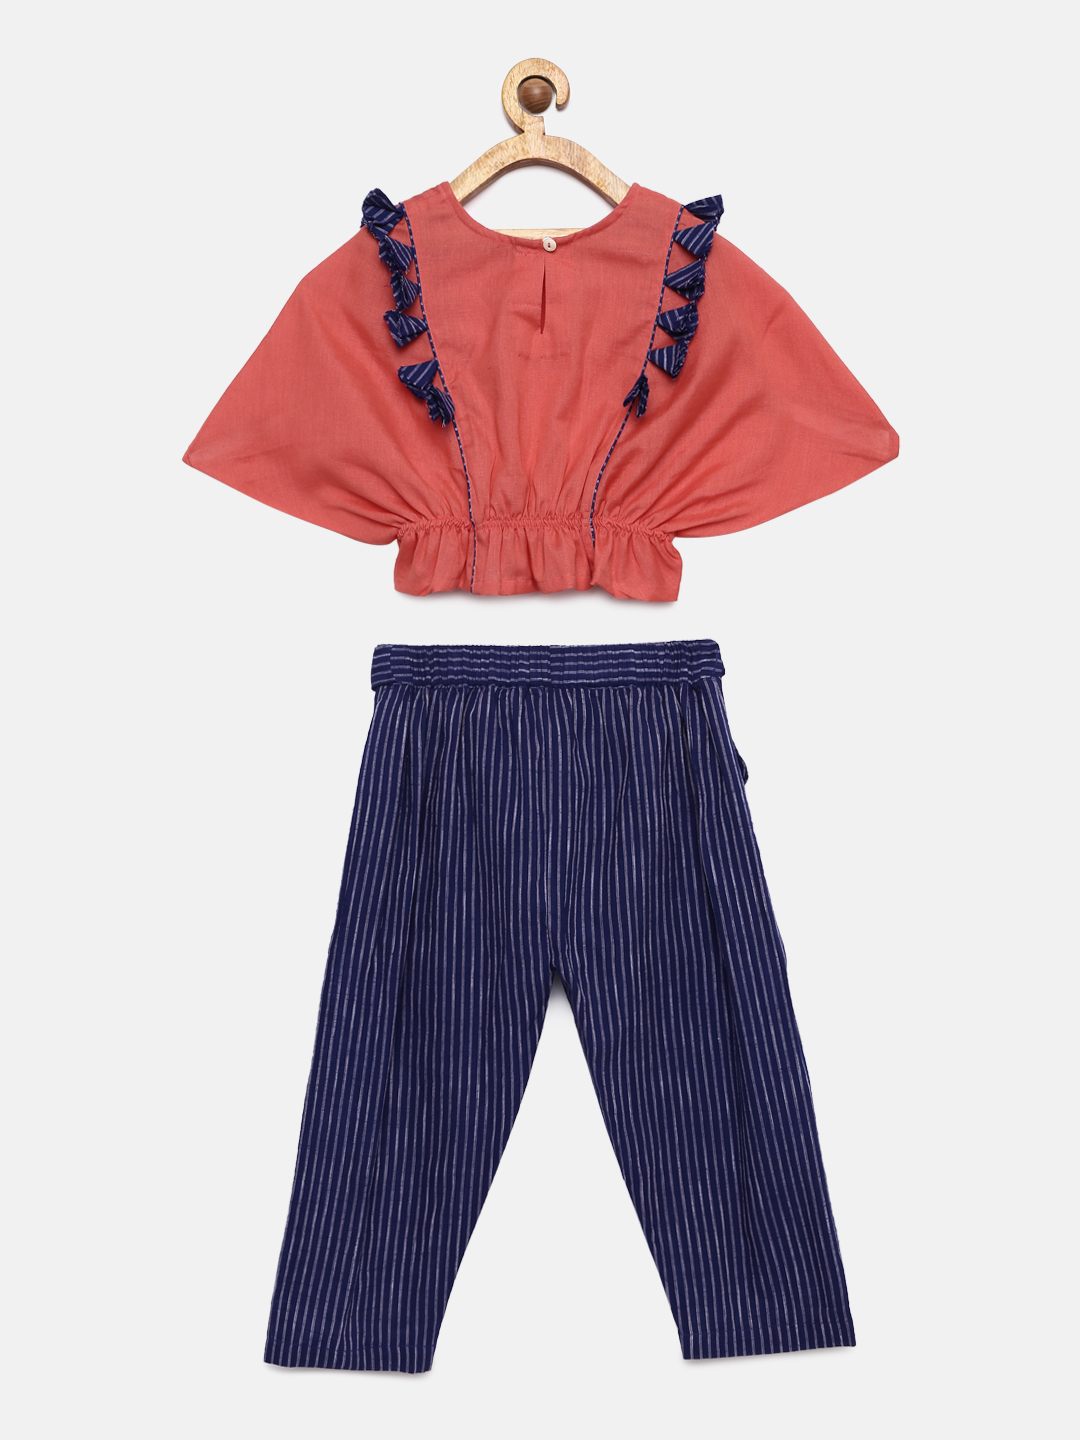 2 1 Baloon Tops with Triangular Sleeves and Stripped Trouser- Coral and Blue